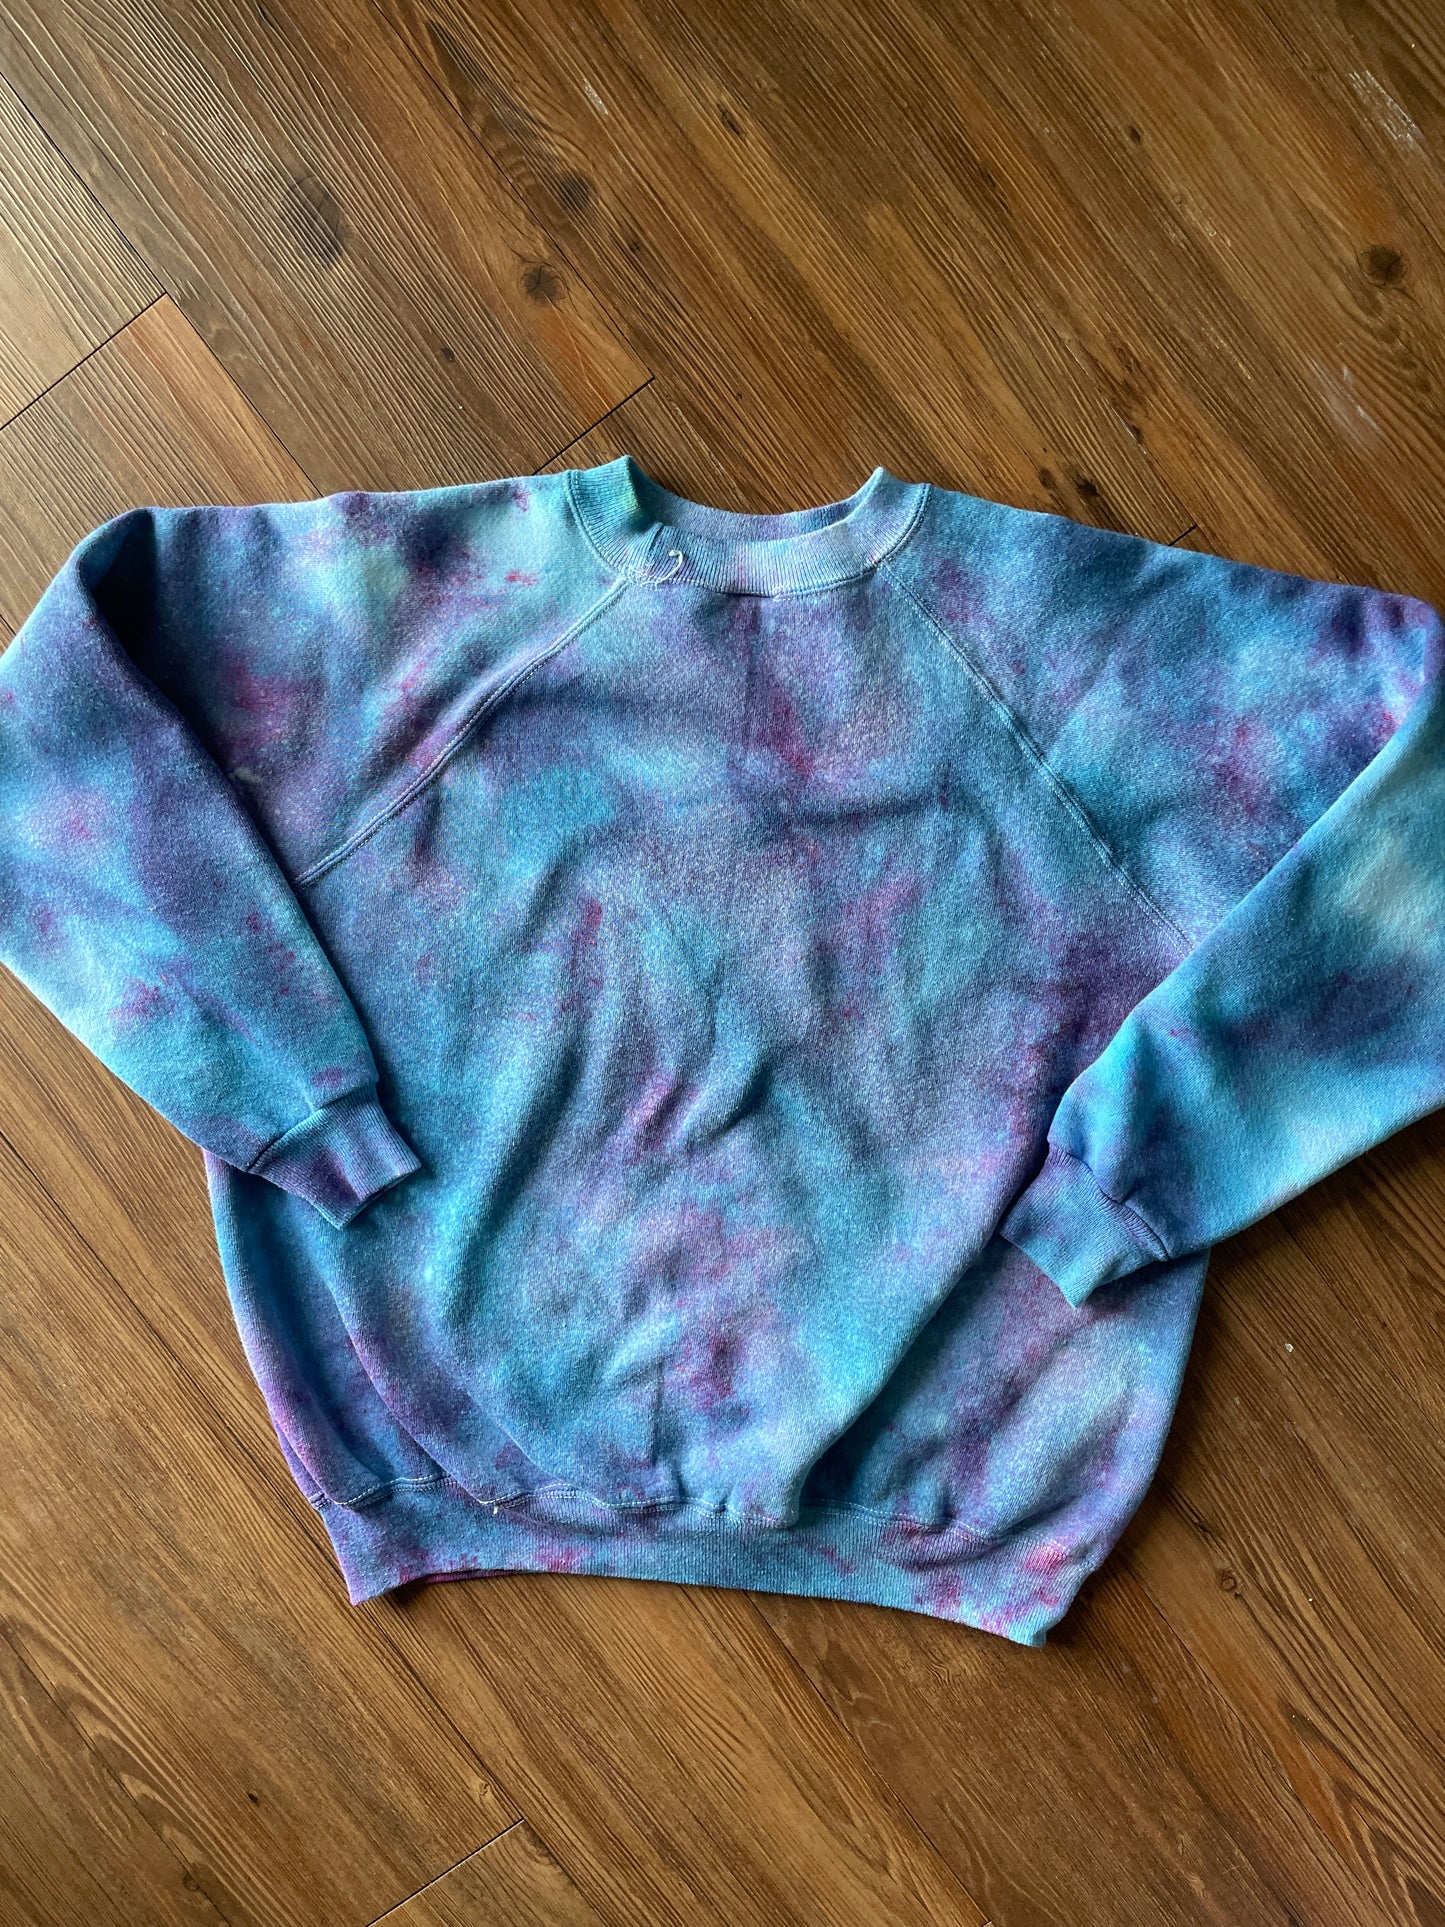 SMALL Women’s Floral Print Galaxy Handmade Tie Dye T-Shirt | One-Of-a-Kind Pastel Blue Long Sleeve